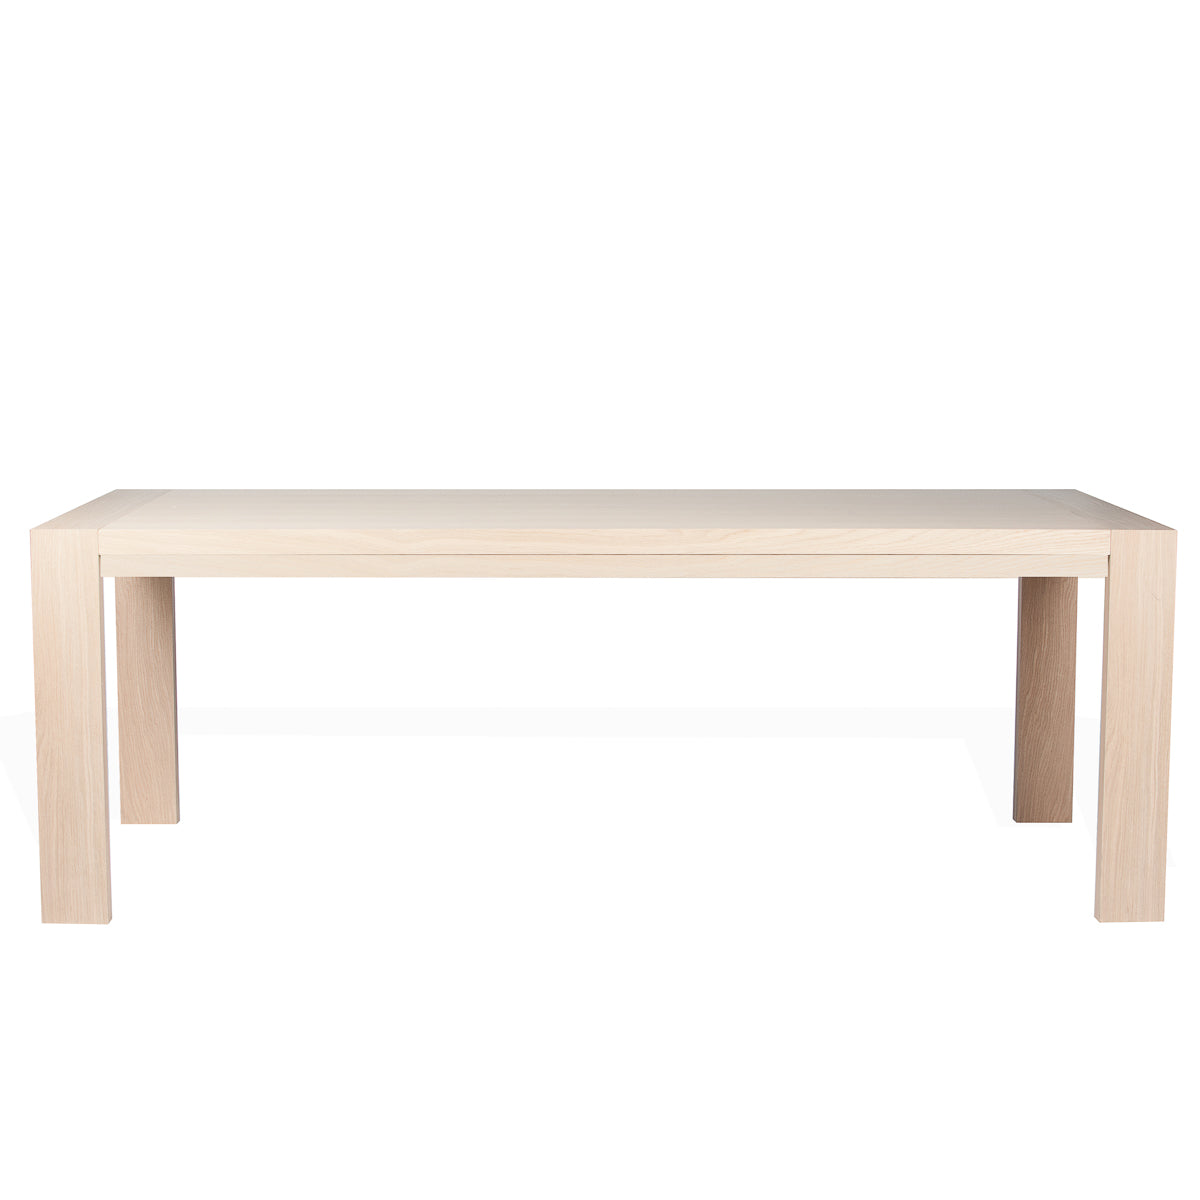 DINELLA MODERN DINING TABLE